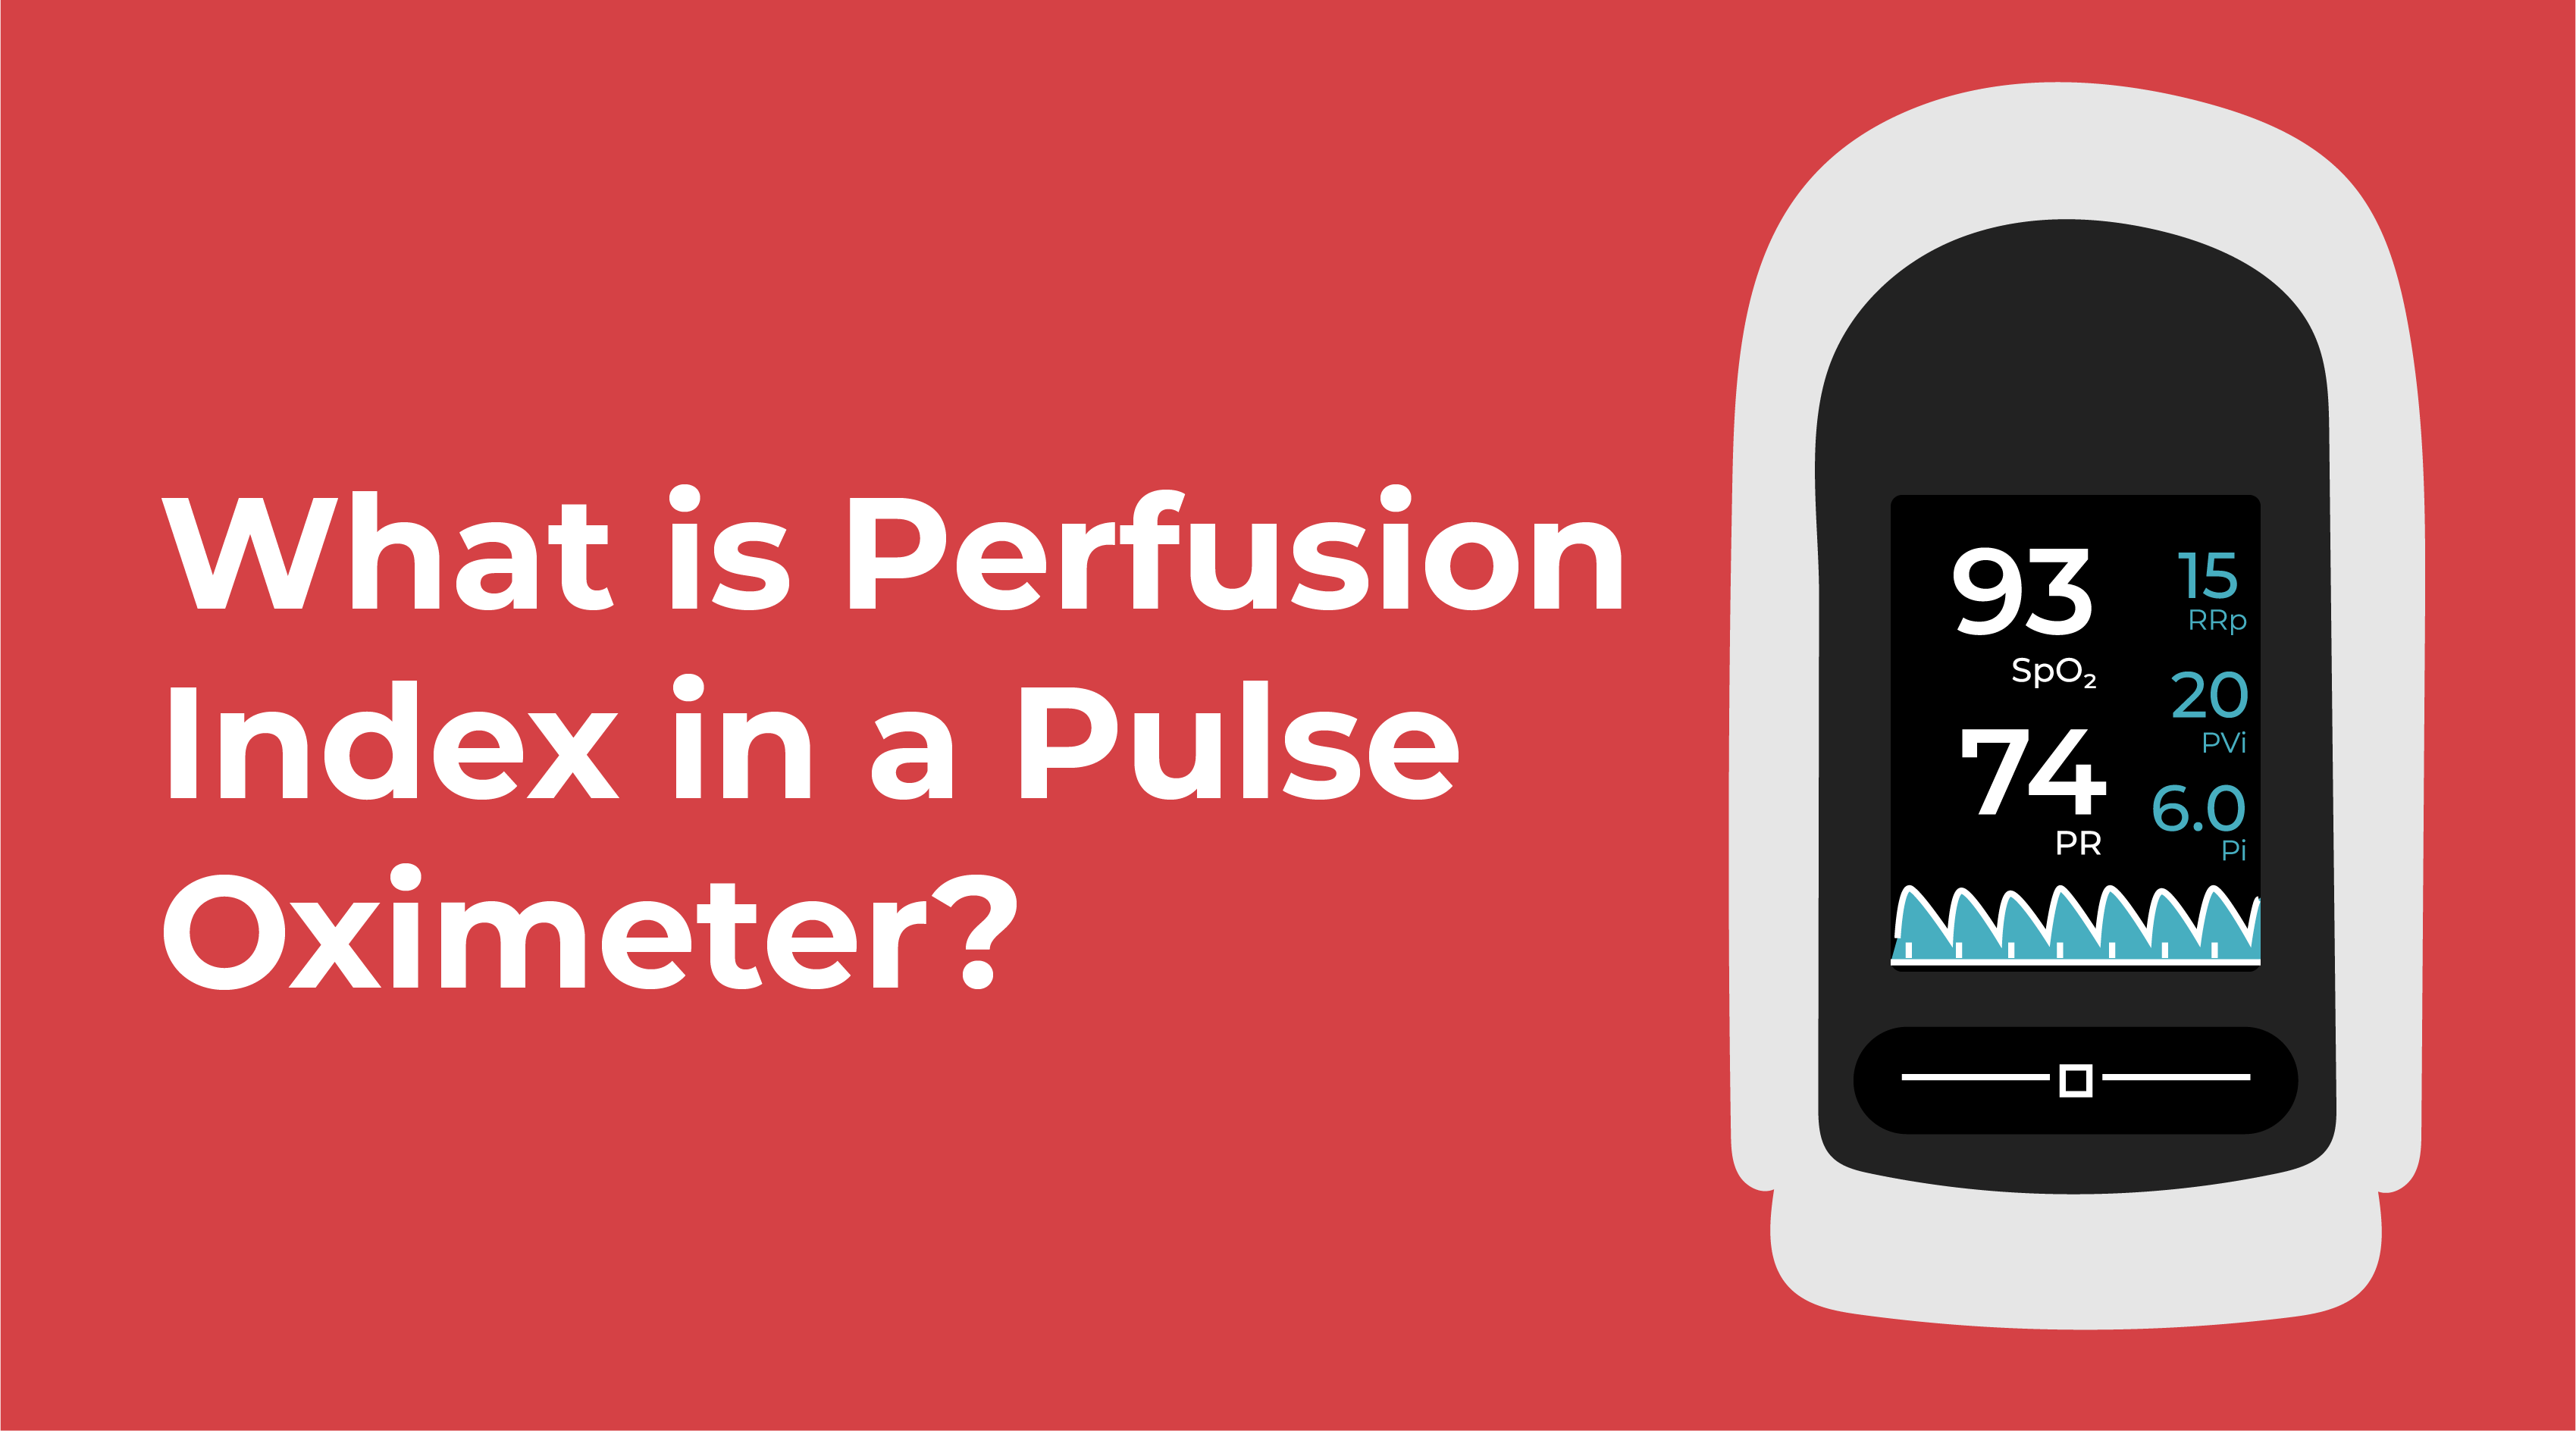 What Perfusion Index in a Pulse Oximeter? - CardiacDirect